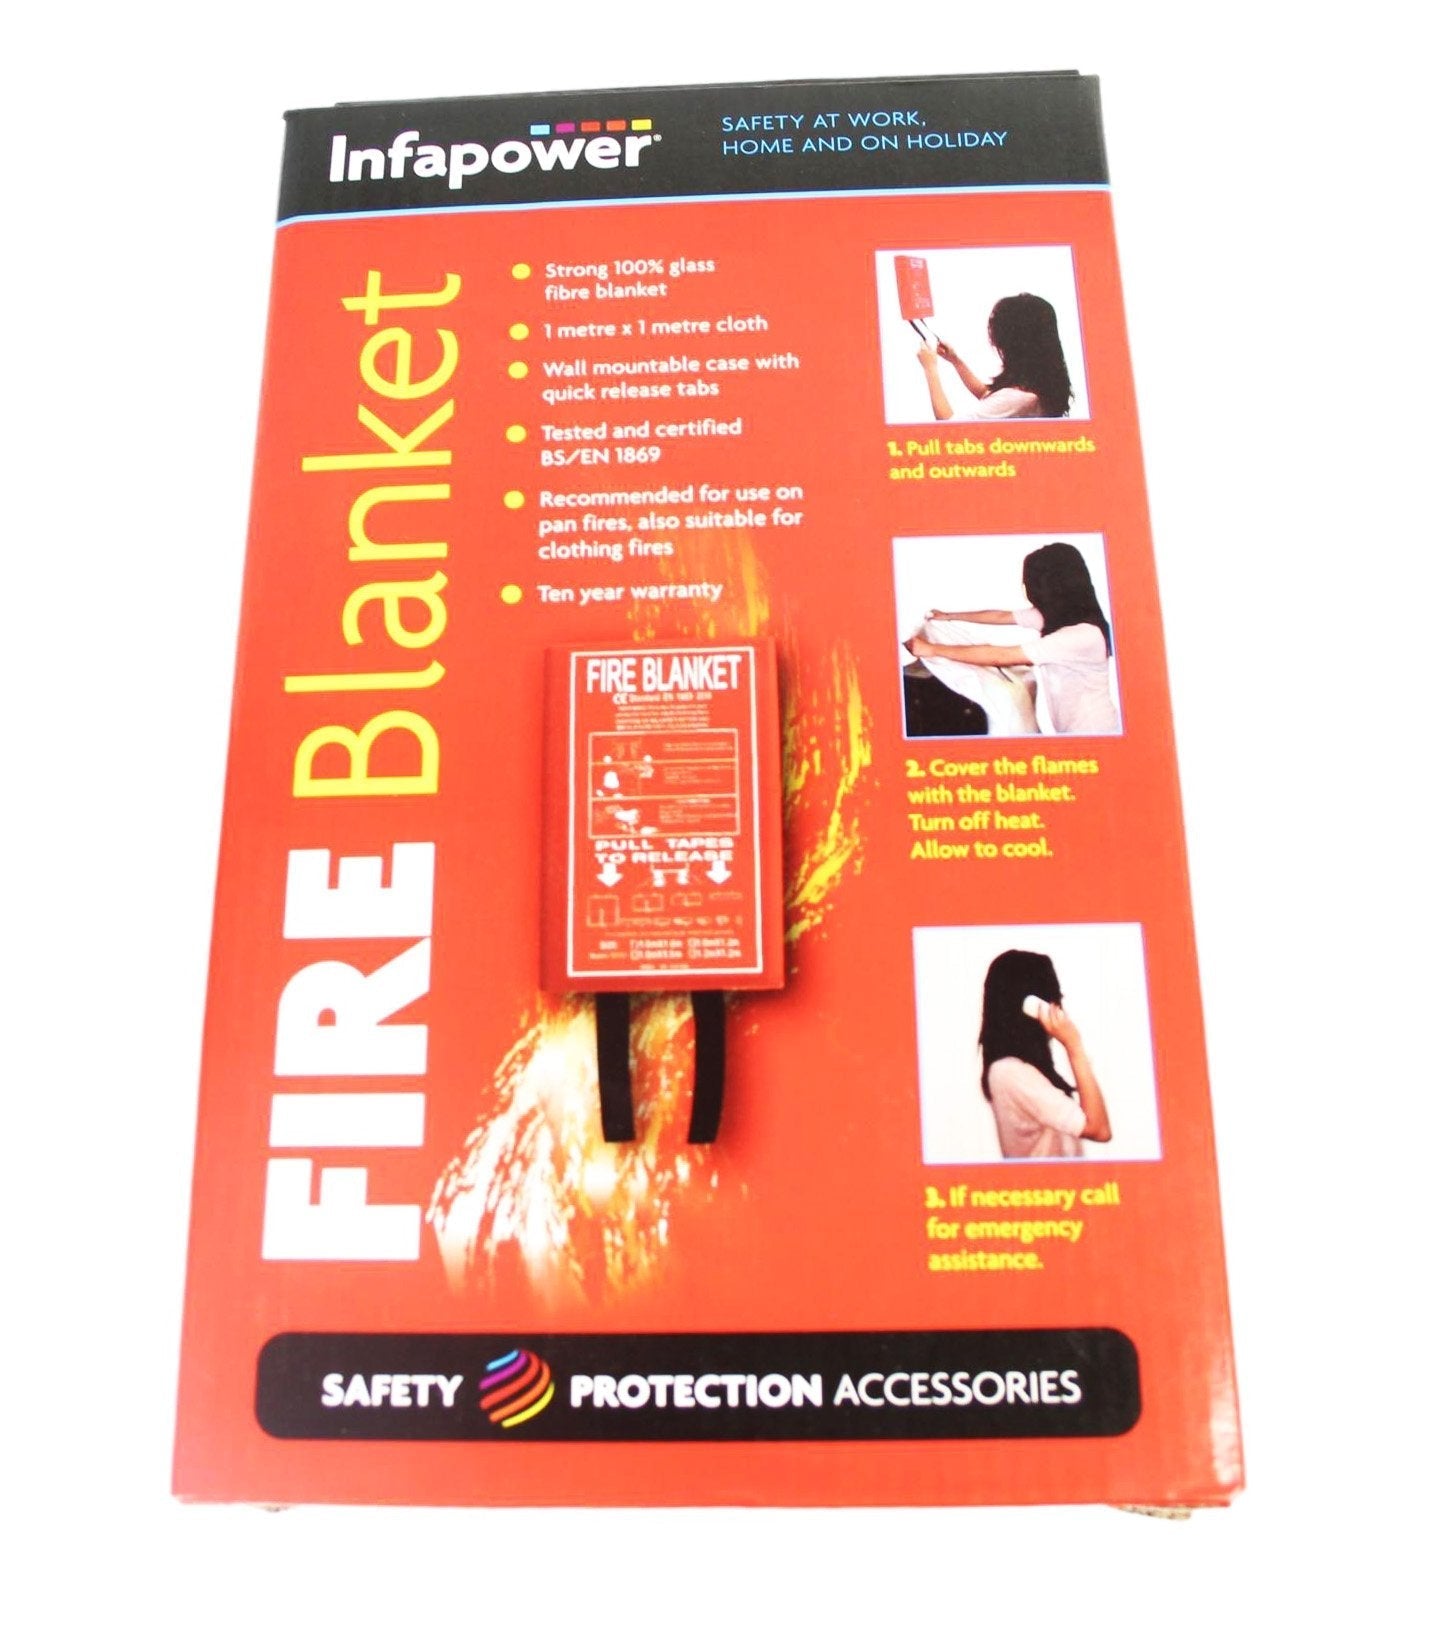 Fire Blanket For Emergency's Tested And Certified Strong 100% Glass Fibre Blanket 825g 1x1m Cloth x012 (Parcel Rate)